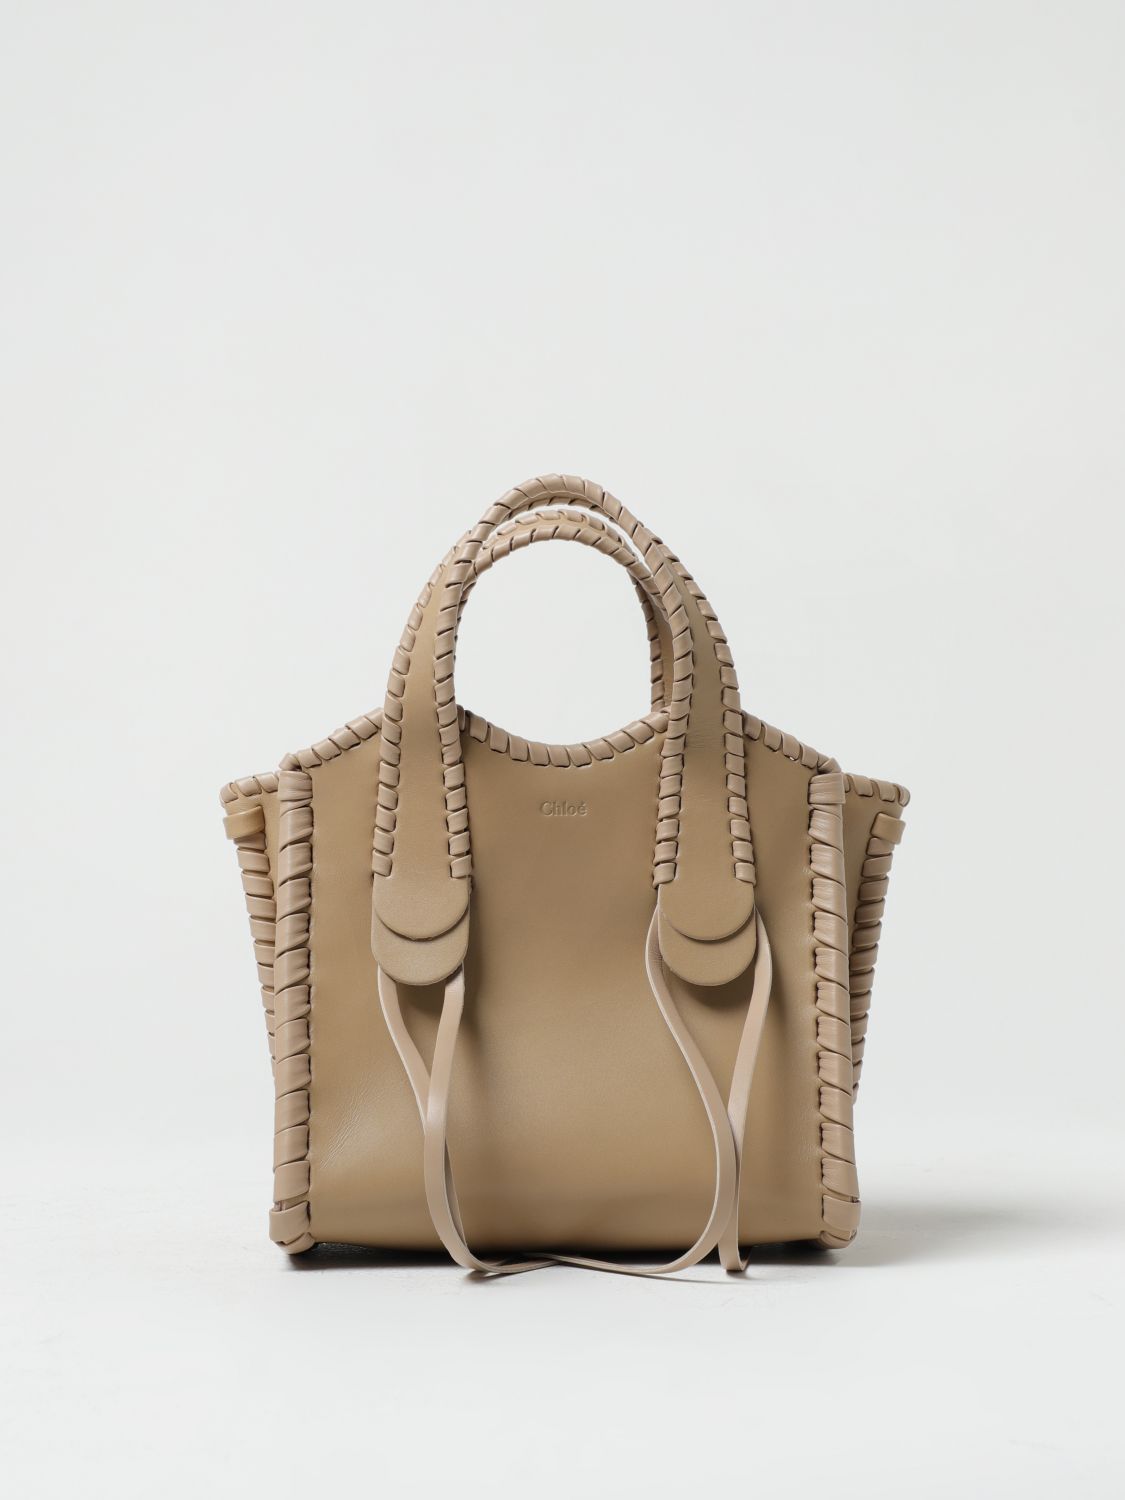 Chloé Mony Leather Bag In Beige